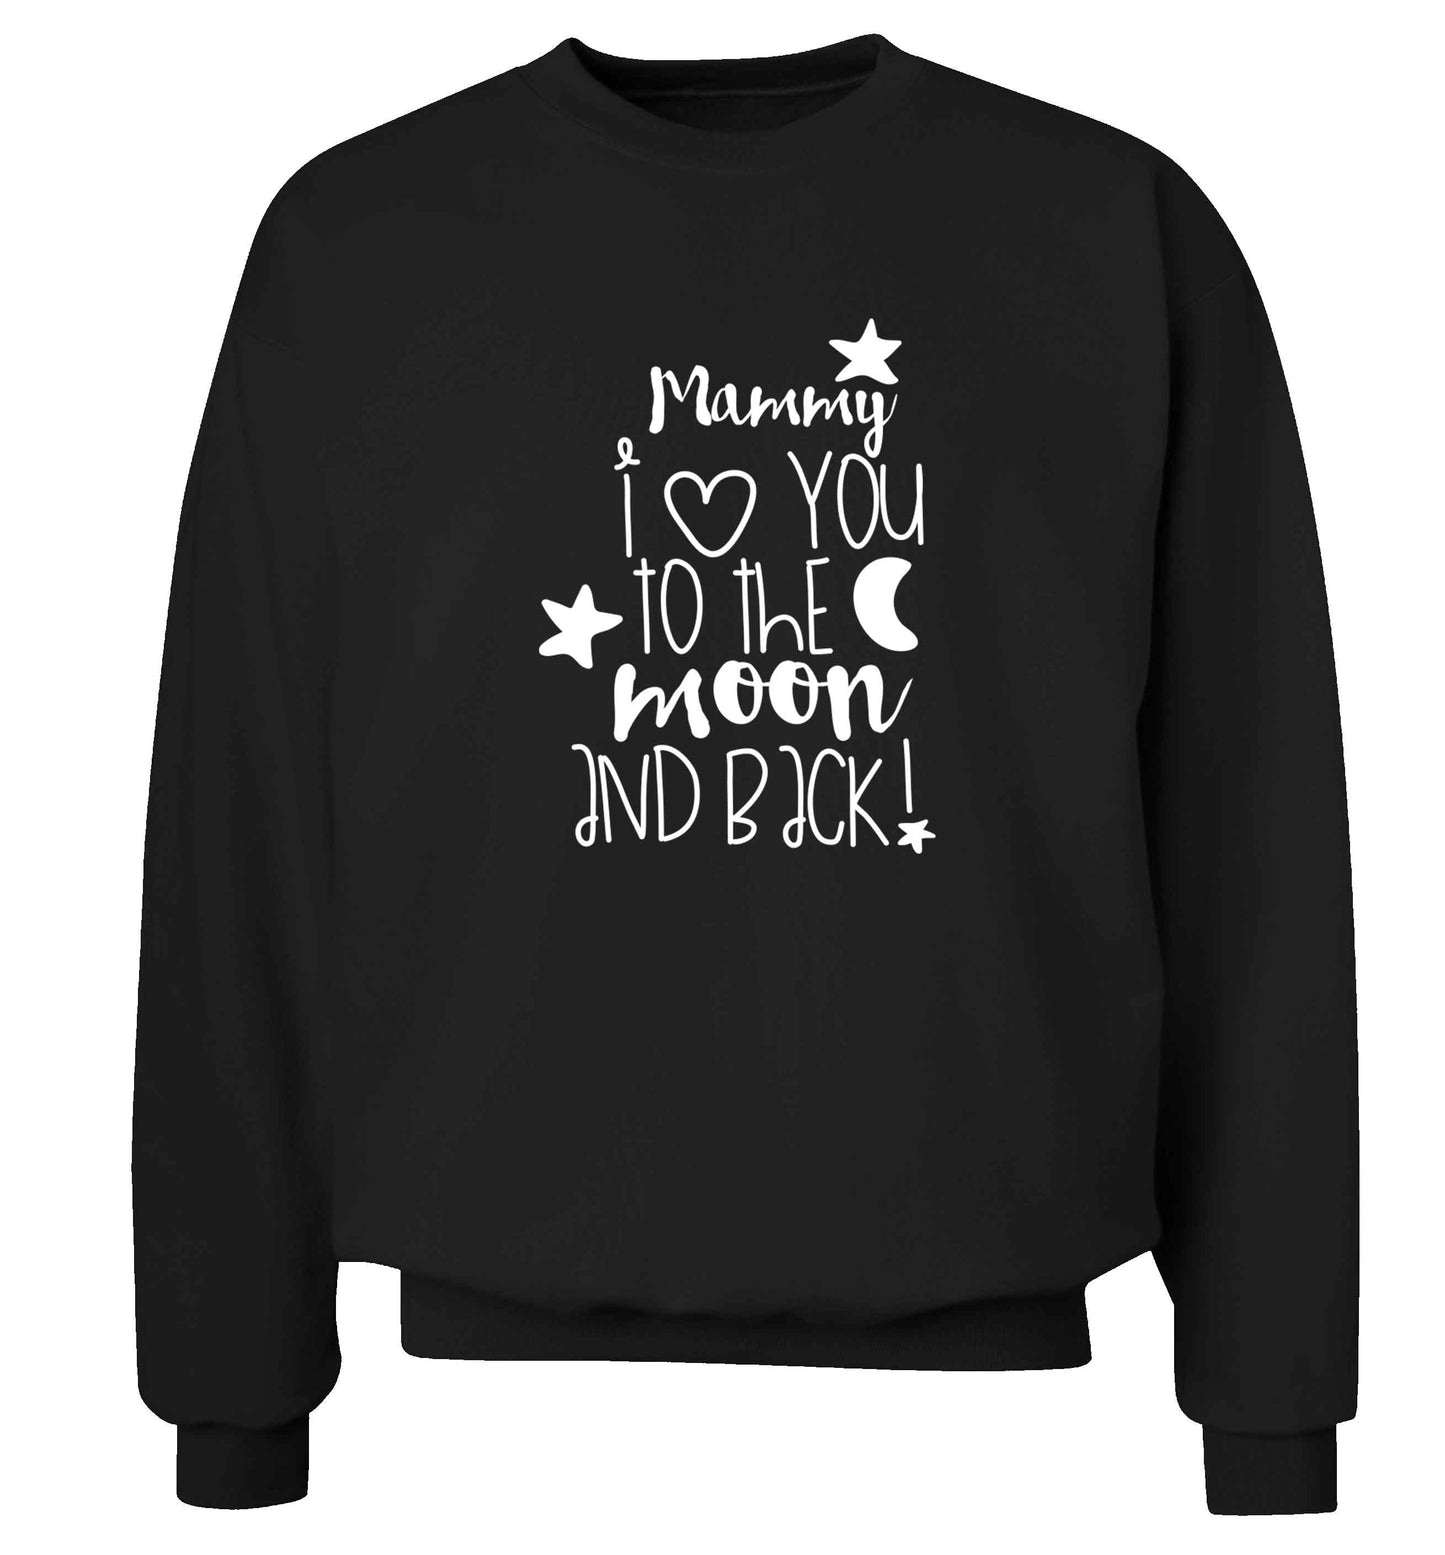 Mammy I love you to the moon and back adult's unisex black sweater 2XL